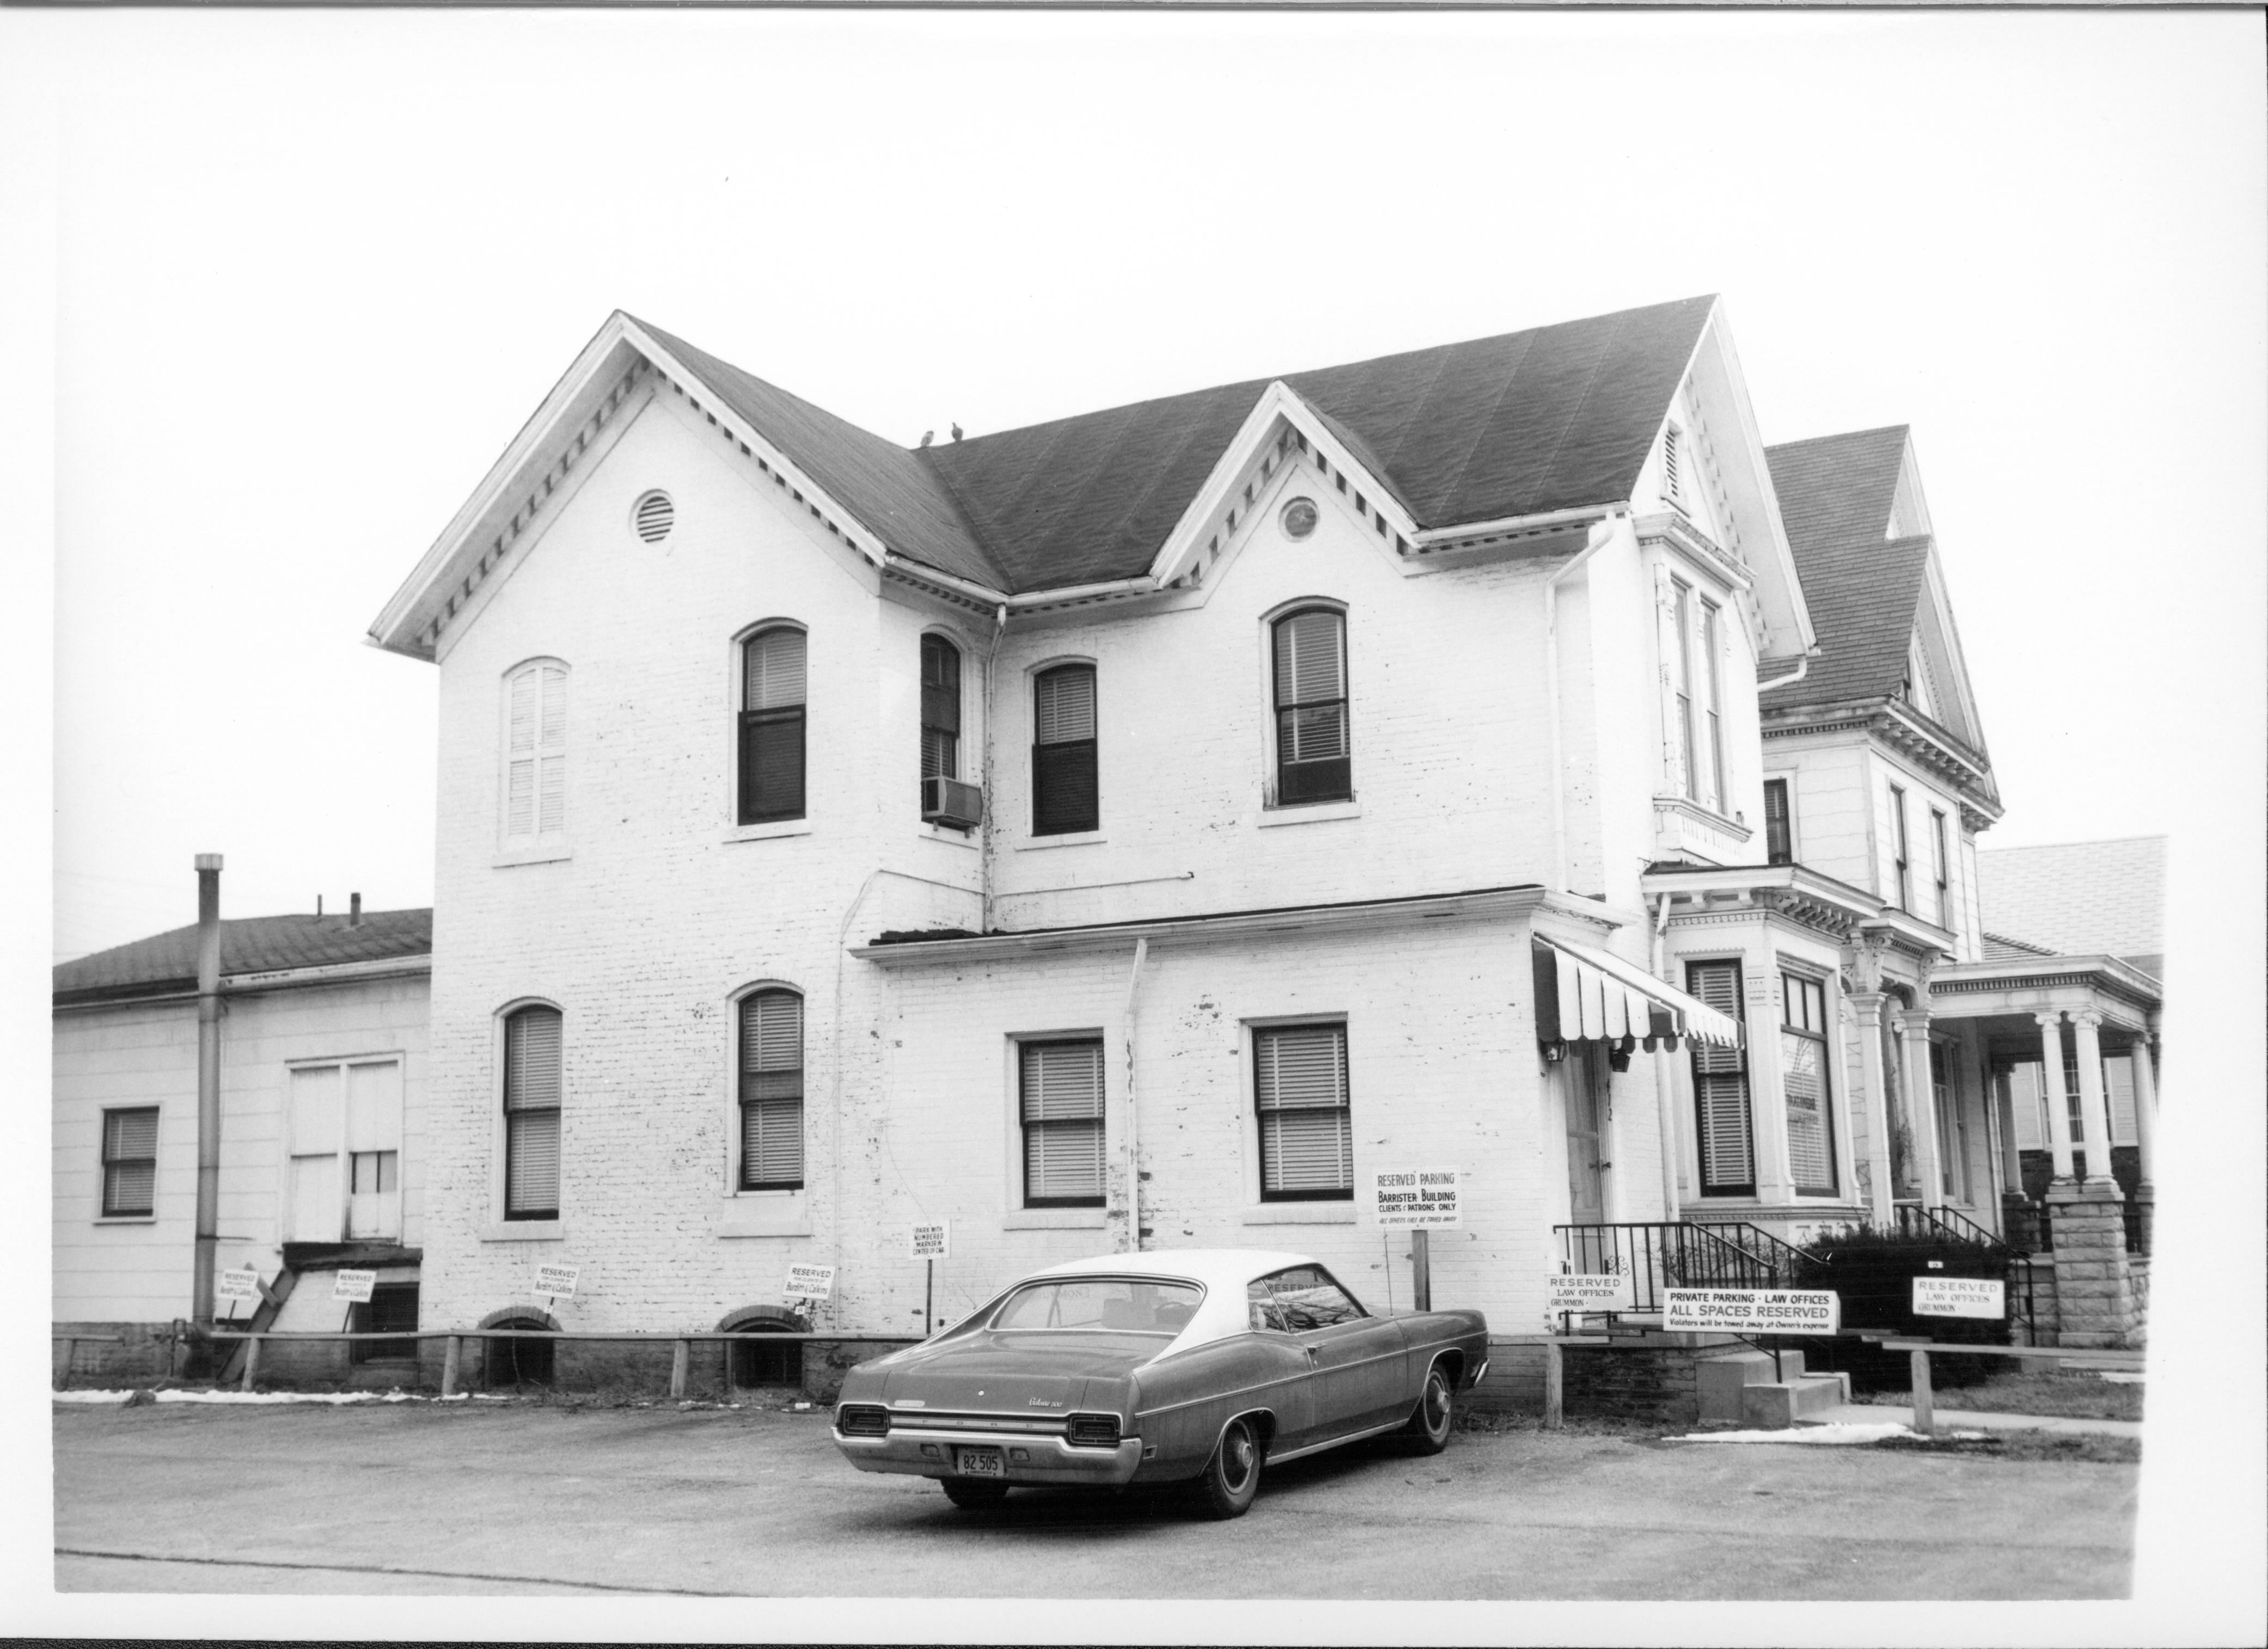 Home and office of Dr. Albert Kwedar on Block 7, Lot 4 along 7th Street, now the location of Visitor Center, parking lot was part of Grace Lutheran Church Looking South along 7th Street south of Capitol. Visitor Center, 7th Street, parking lot, Kwedar